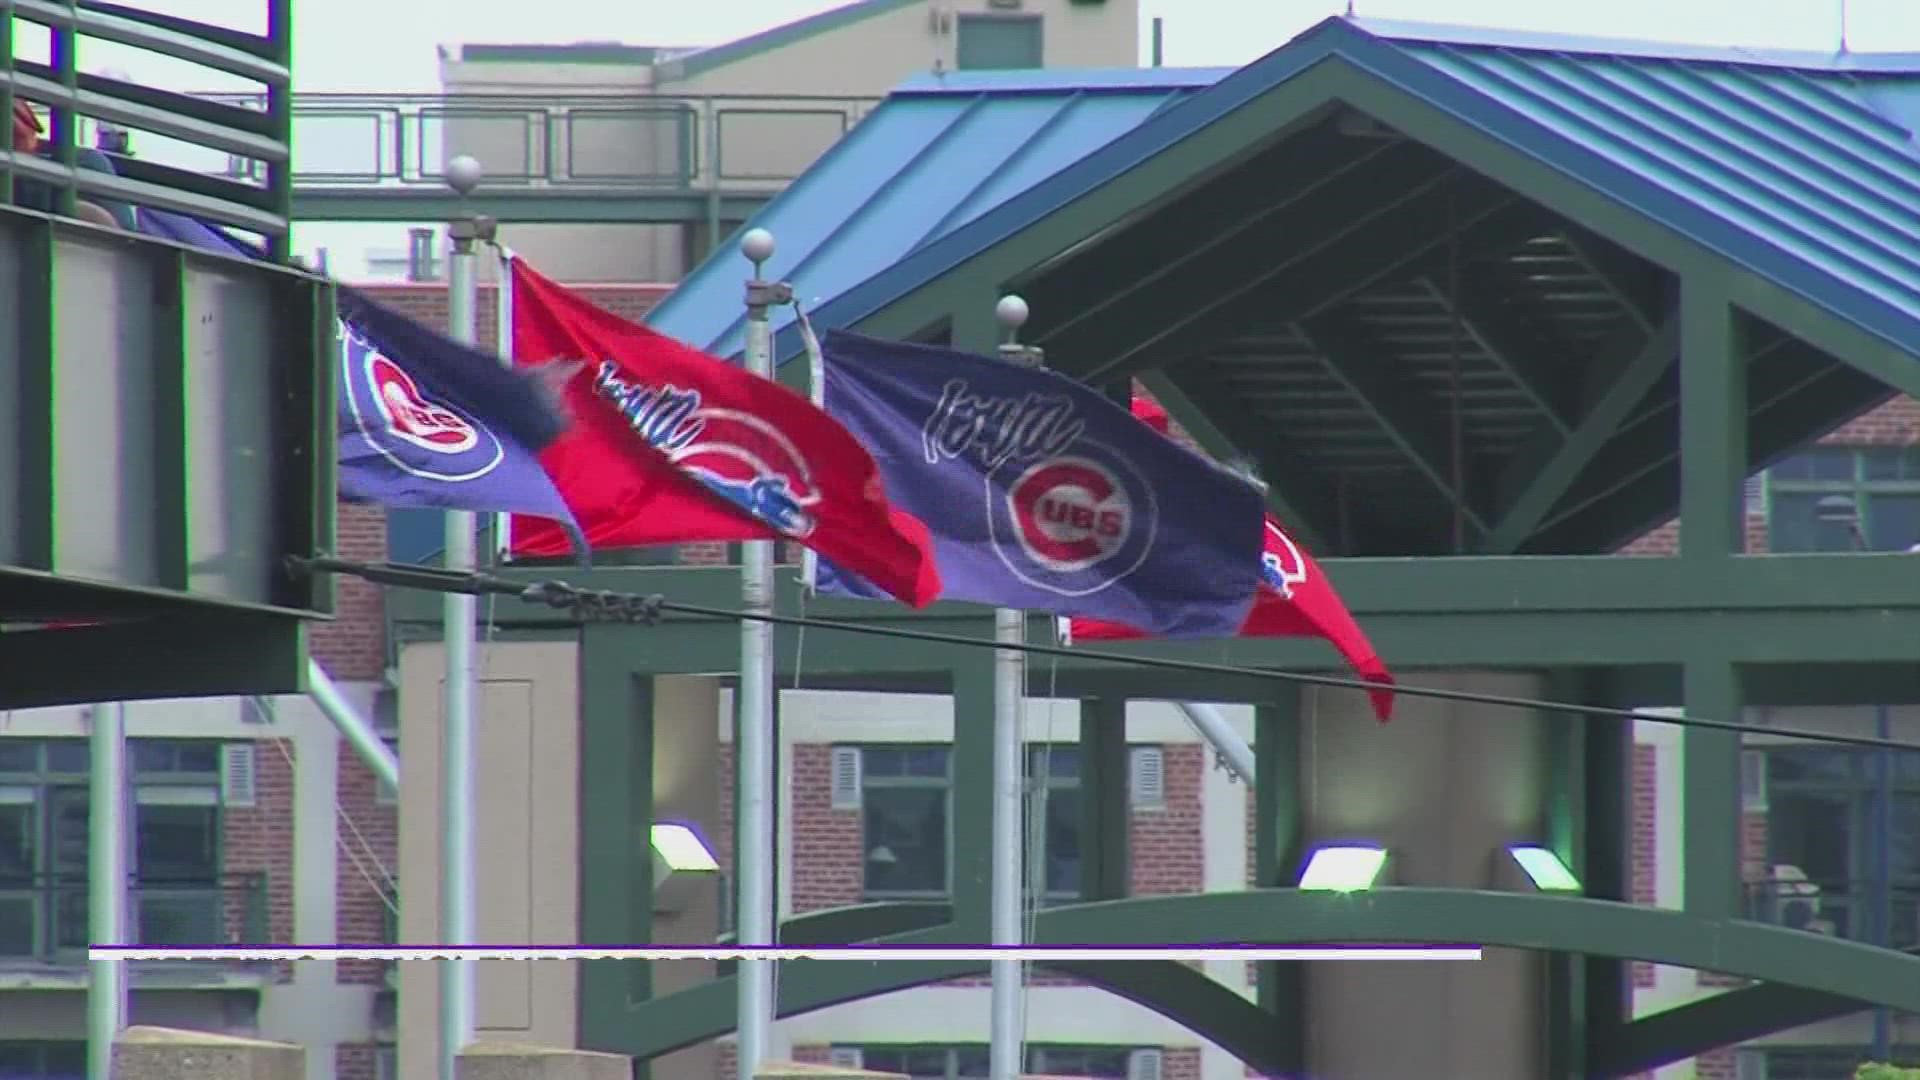 Former Iowa Cubs owner Michael Gartner told employees he was handing out new business cards. Instead, they received bonus checks from the team's sale last month.